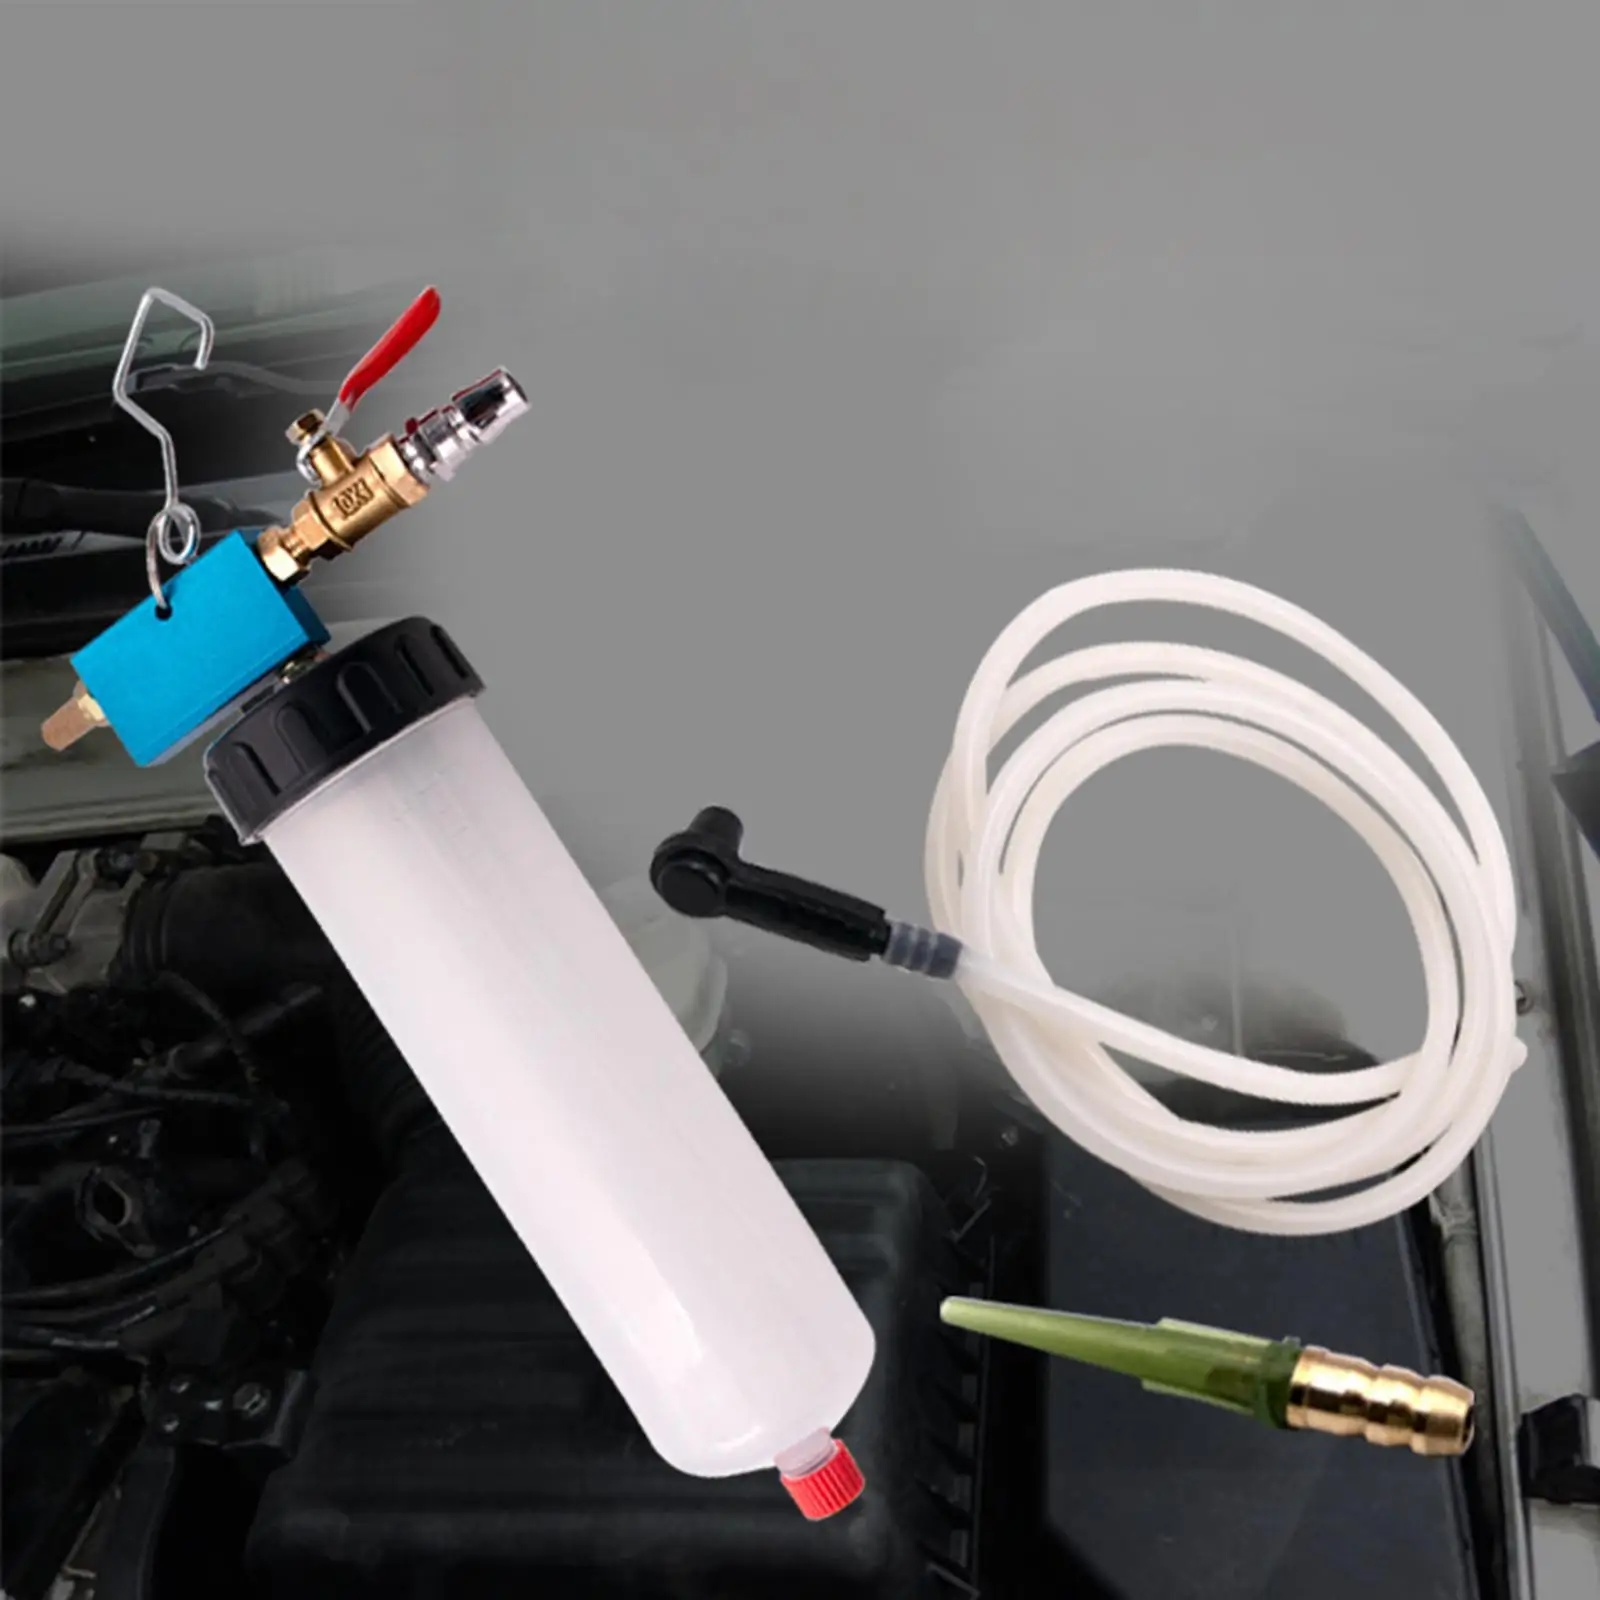 Auto Brake Fluid Extractor Equipment Kit Pneumatic Evacuator Oil Change Replacement Tool for Automotive Car